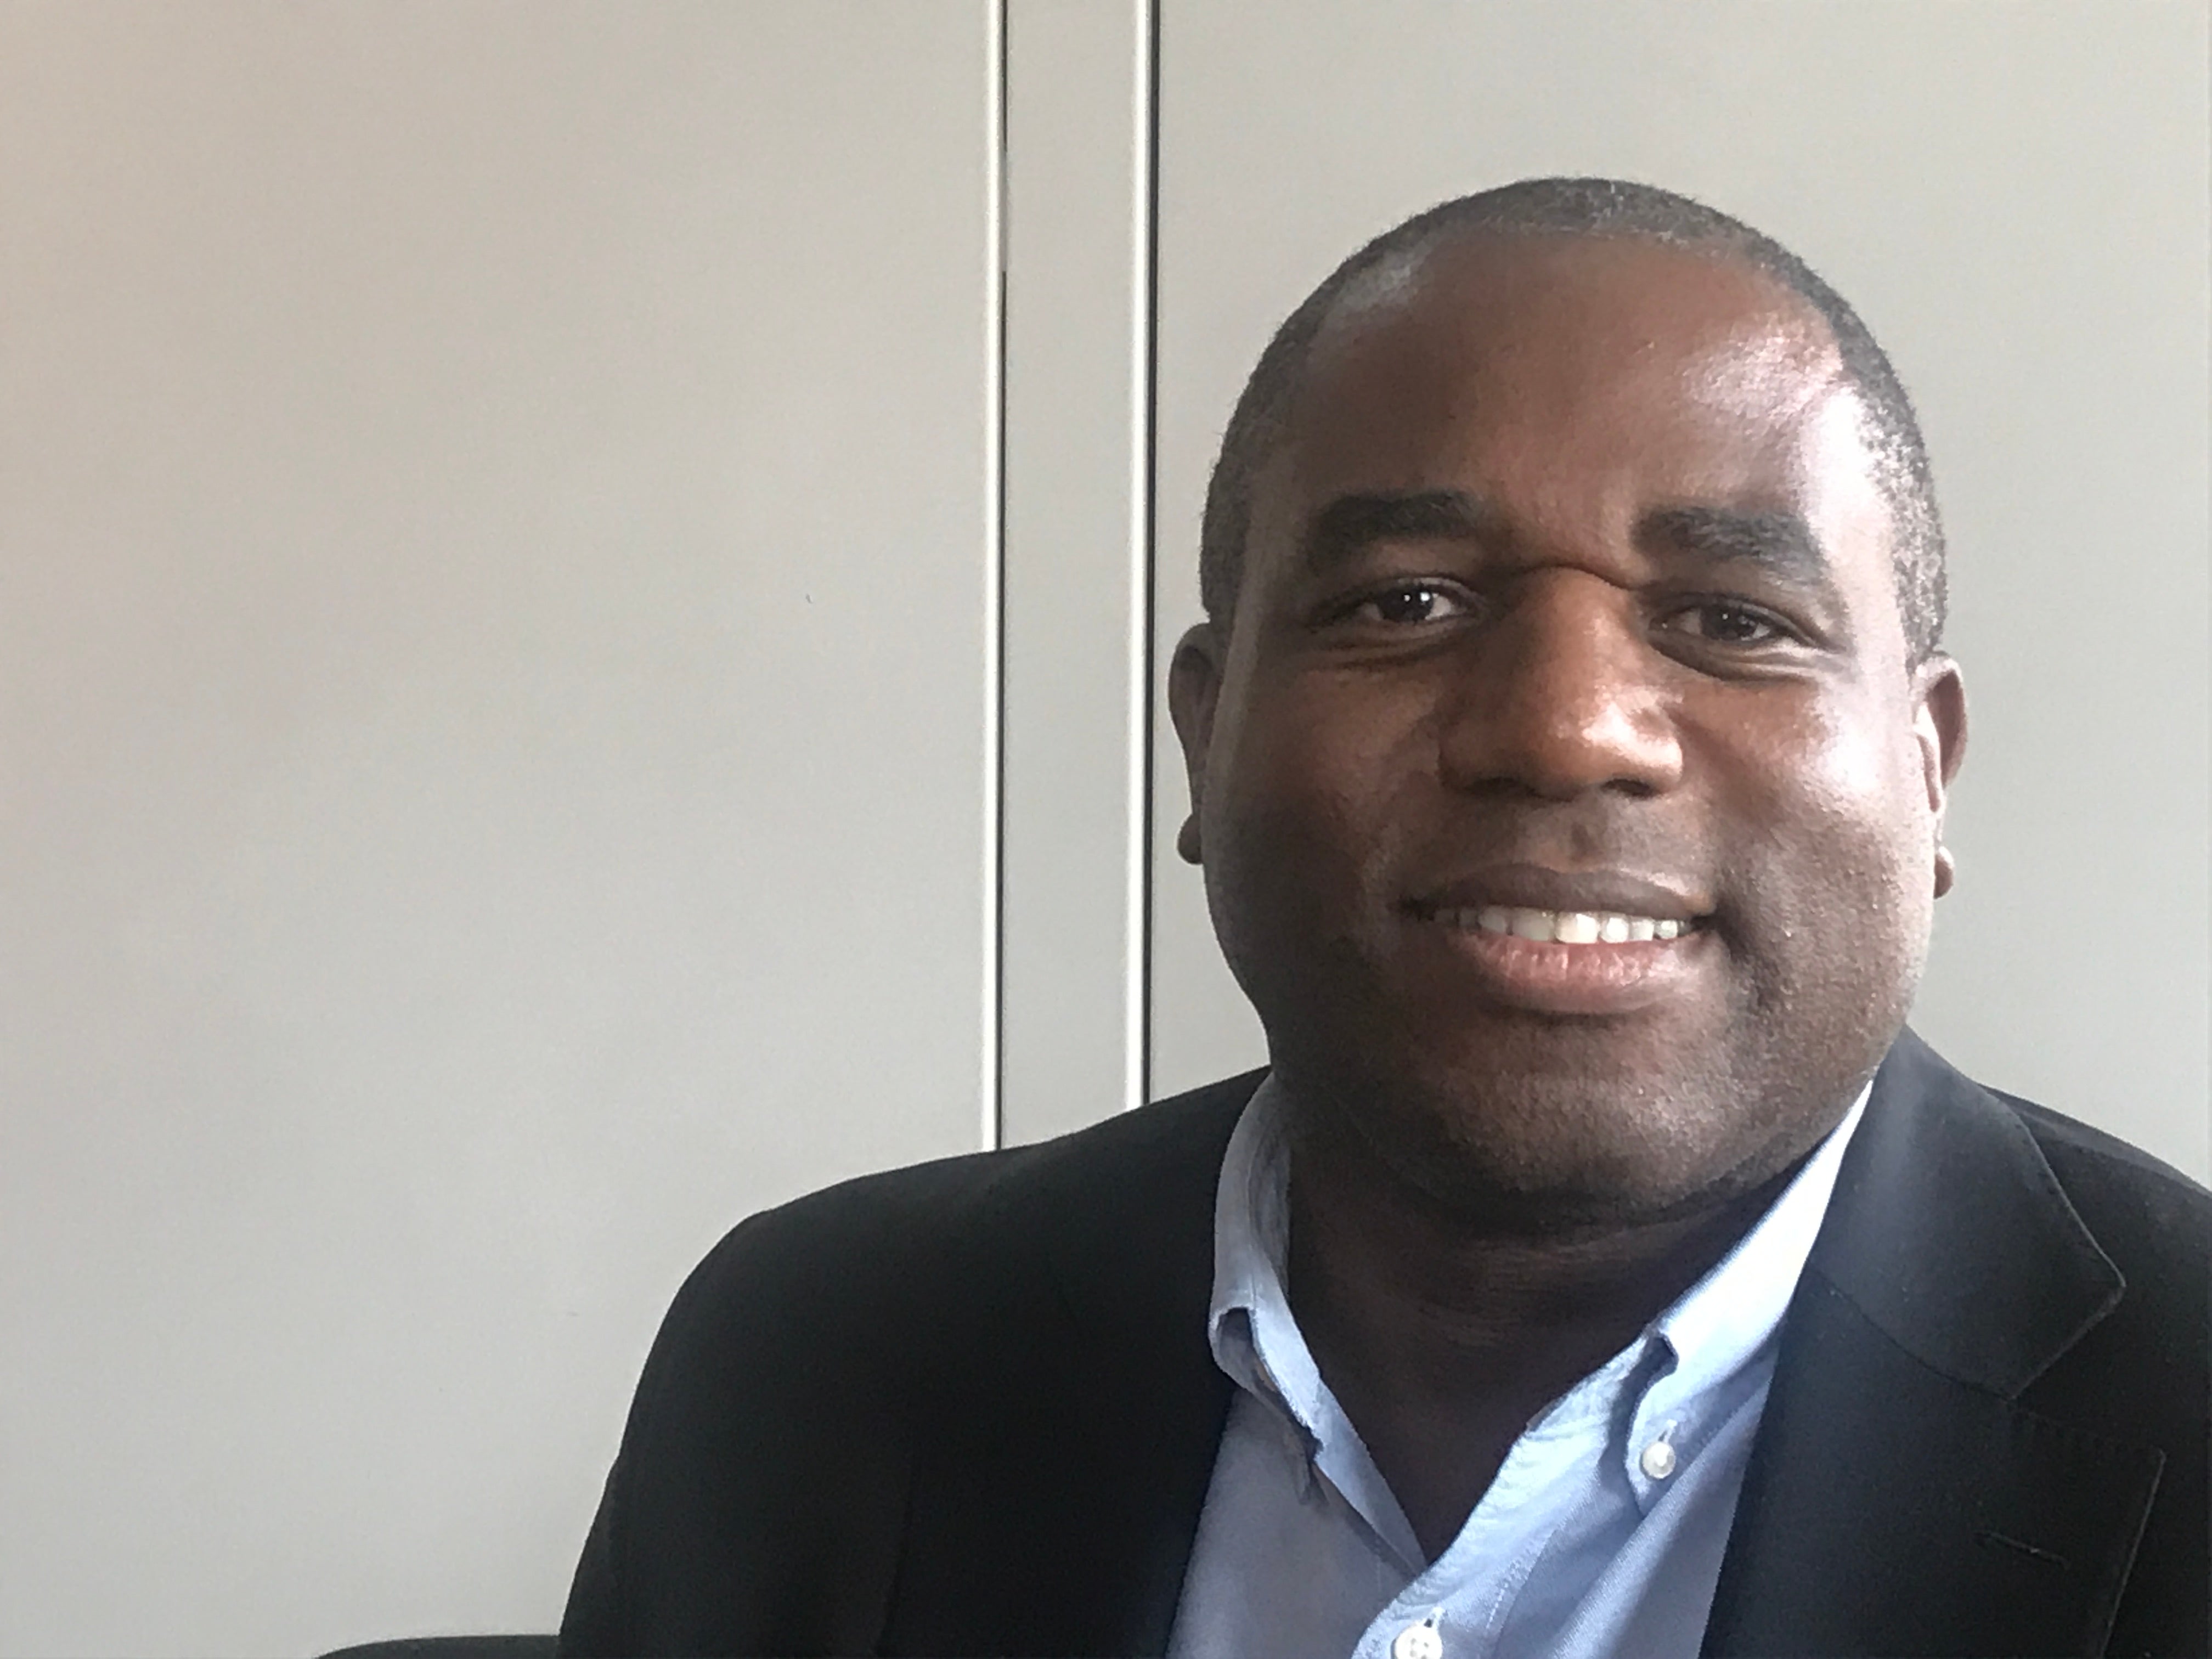 independent.co.uk - Andrew Woodcock - Labour would put climate crisis at heart of foreign policy, David Lammy vows